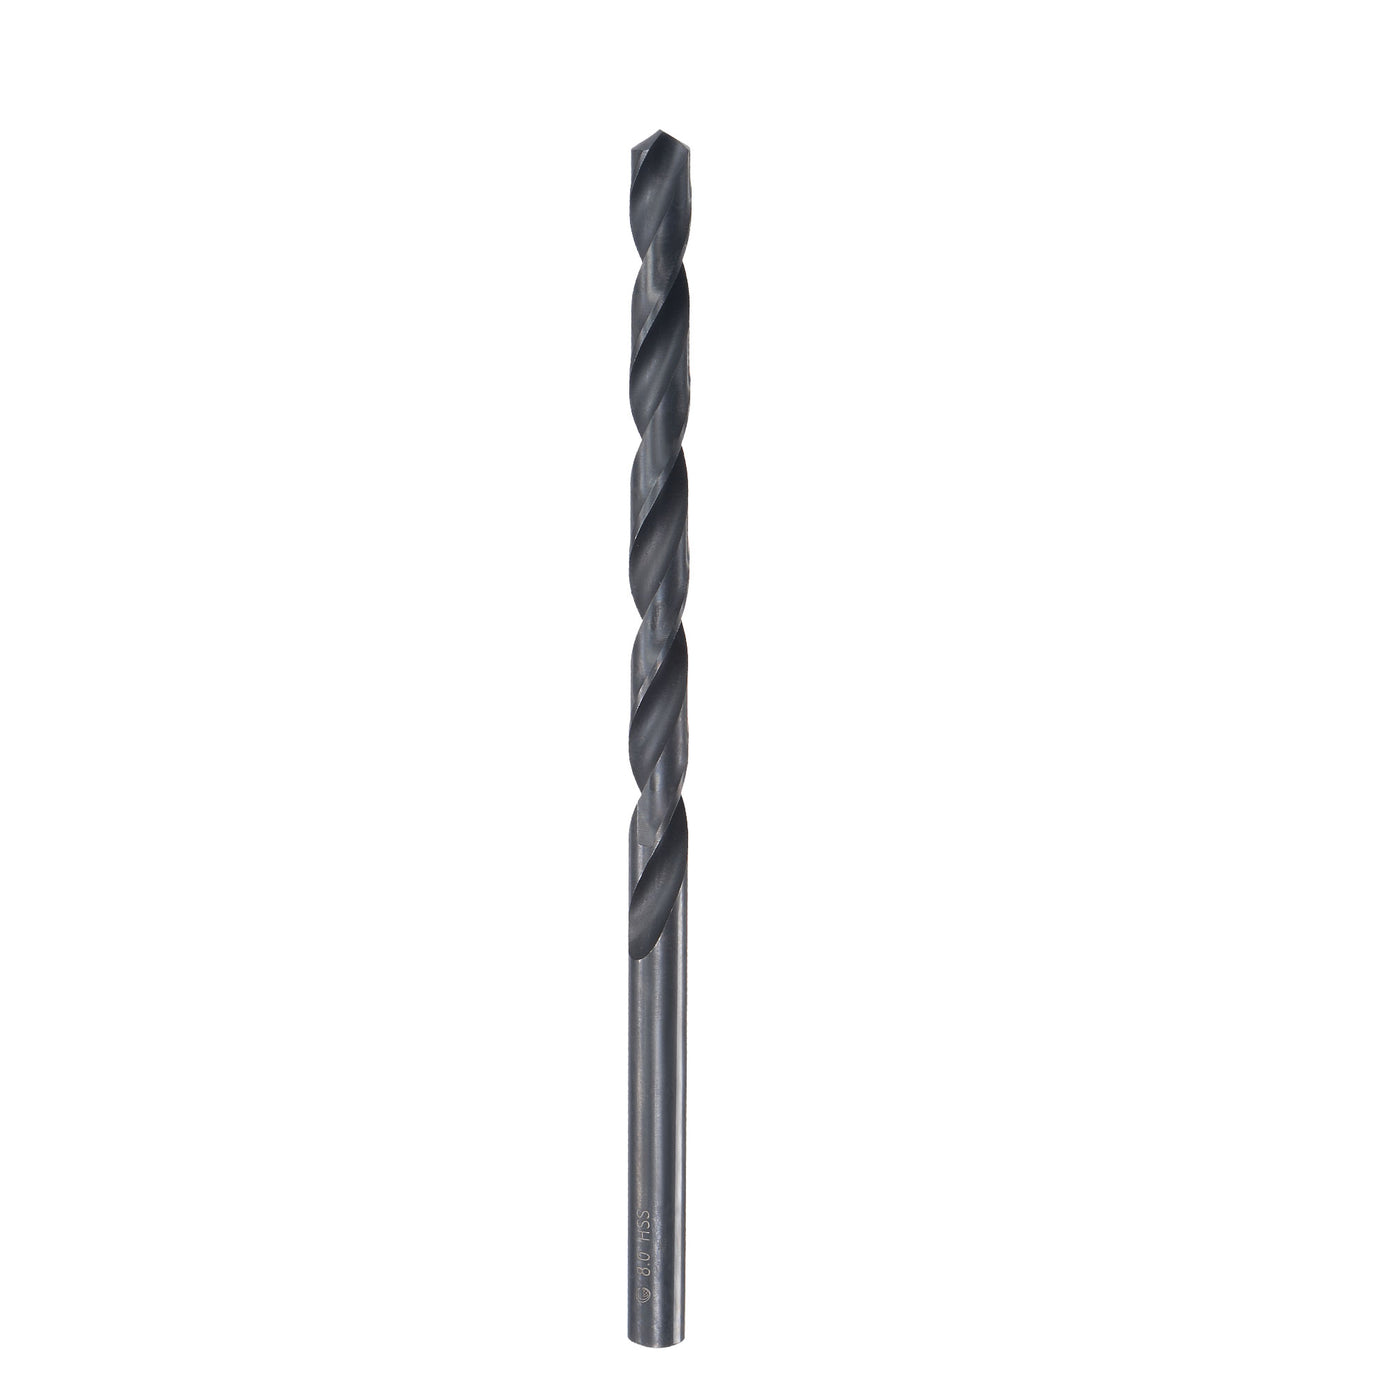 uxcell Uxcell High Speed Steel Lengthen Twist Drill Bit 8mm Fully Ground Black Oxide